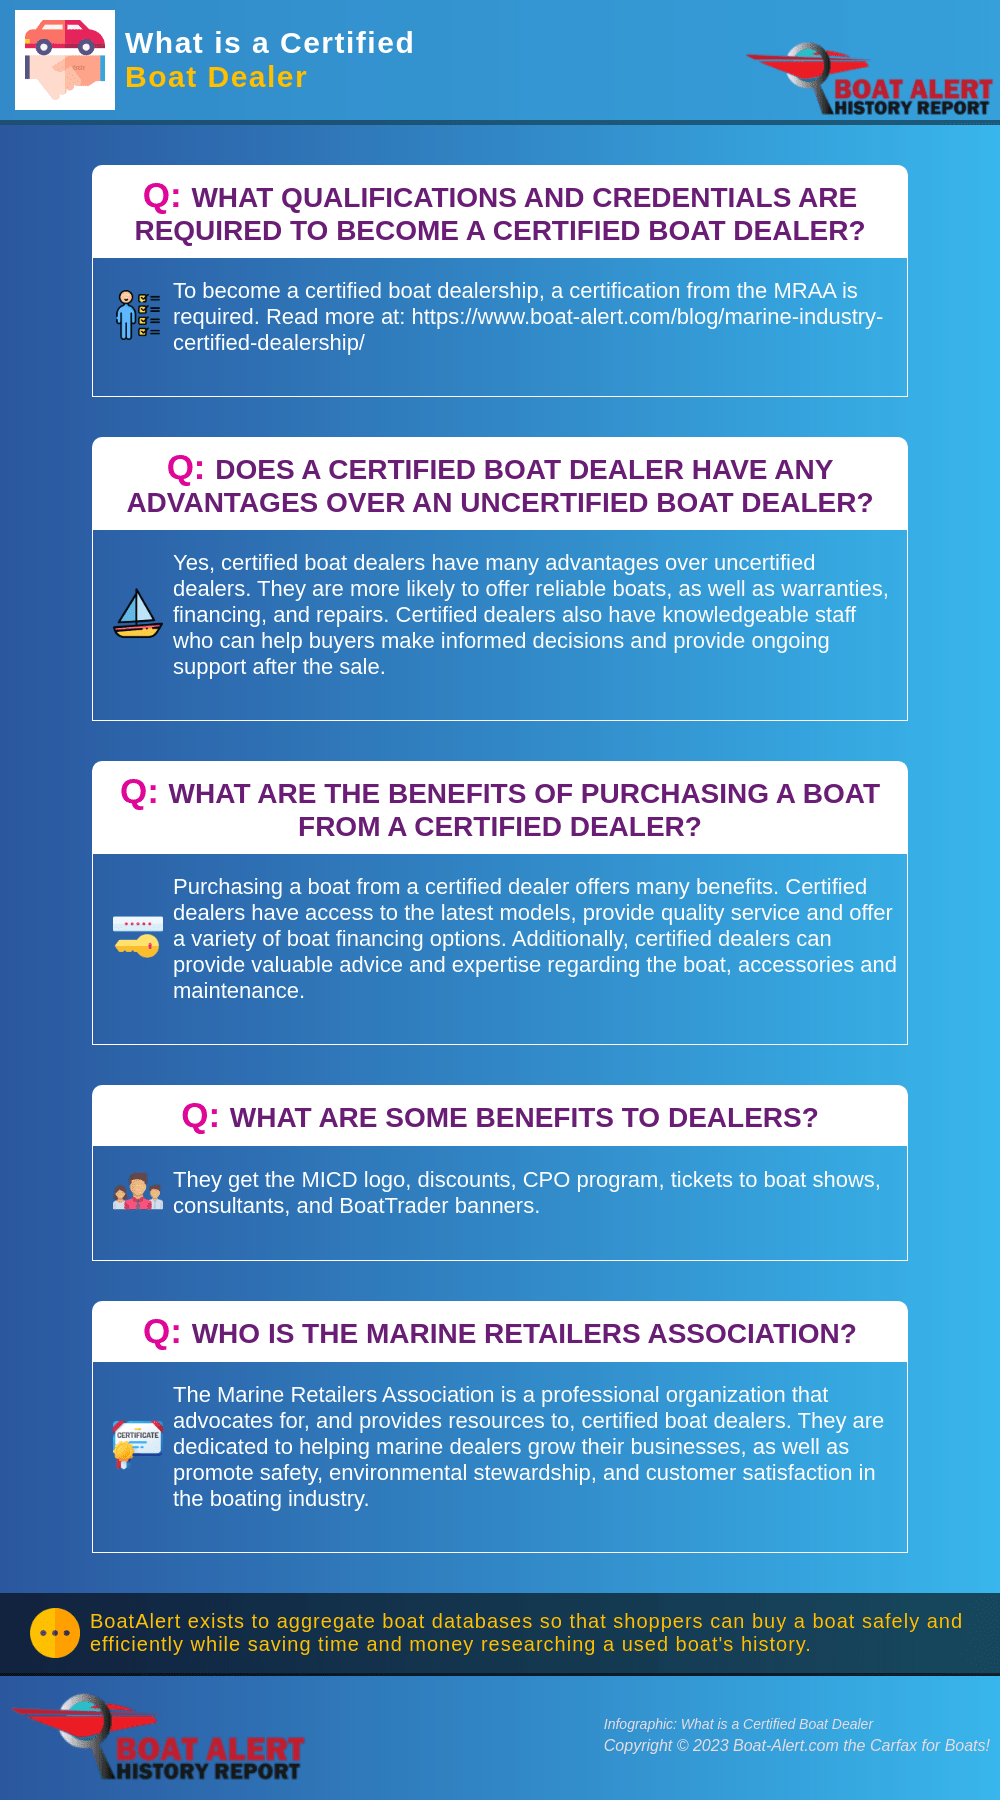 Infographic: What is a certified boat dealership?